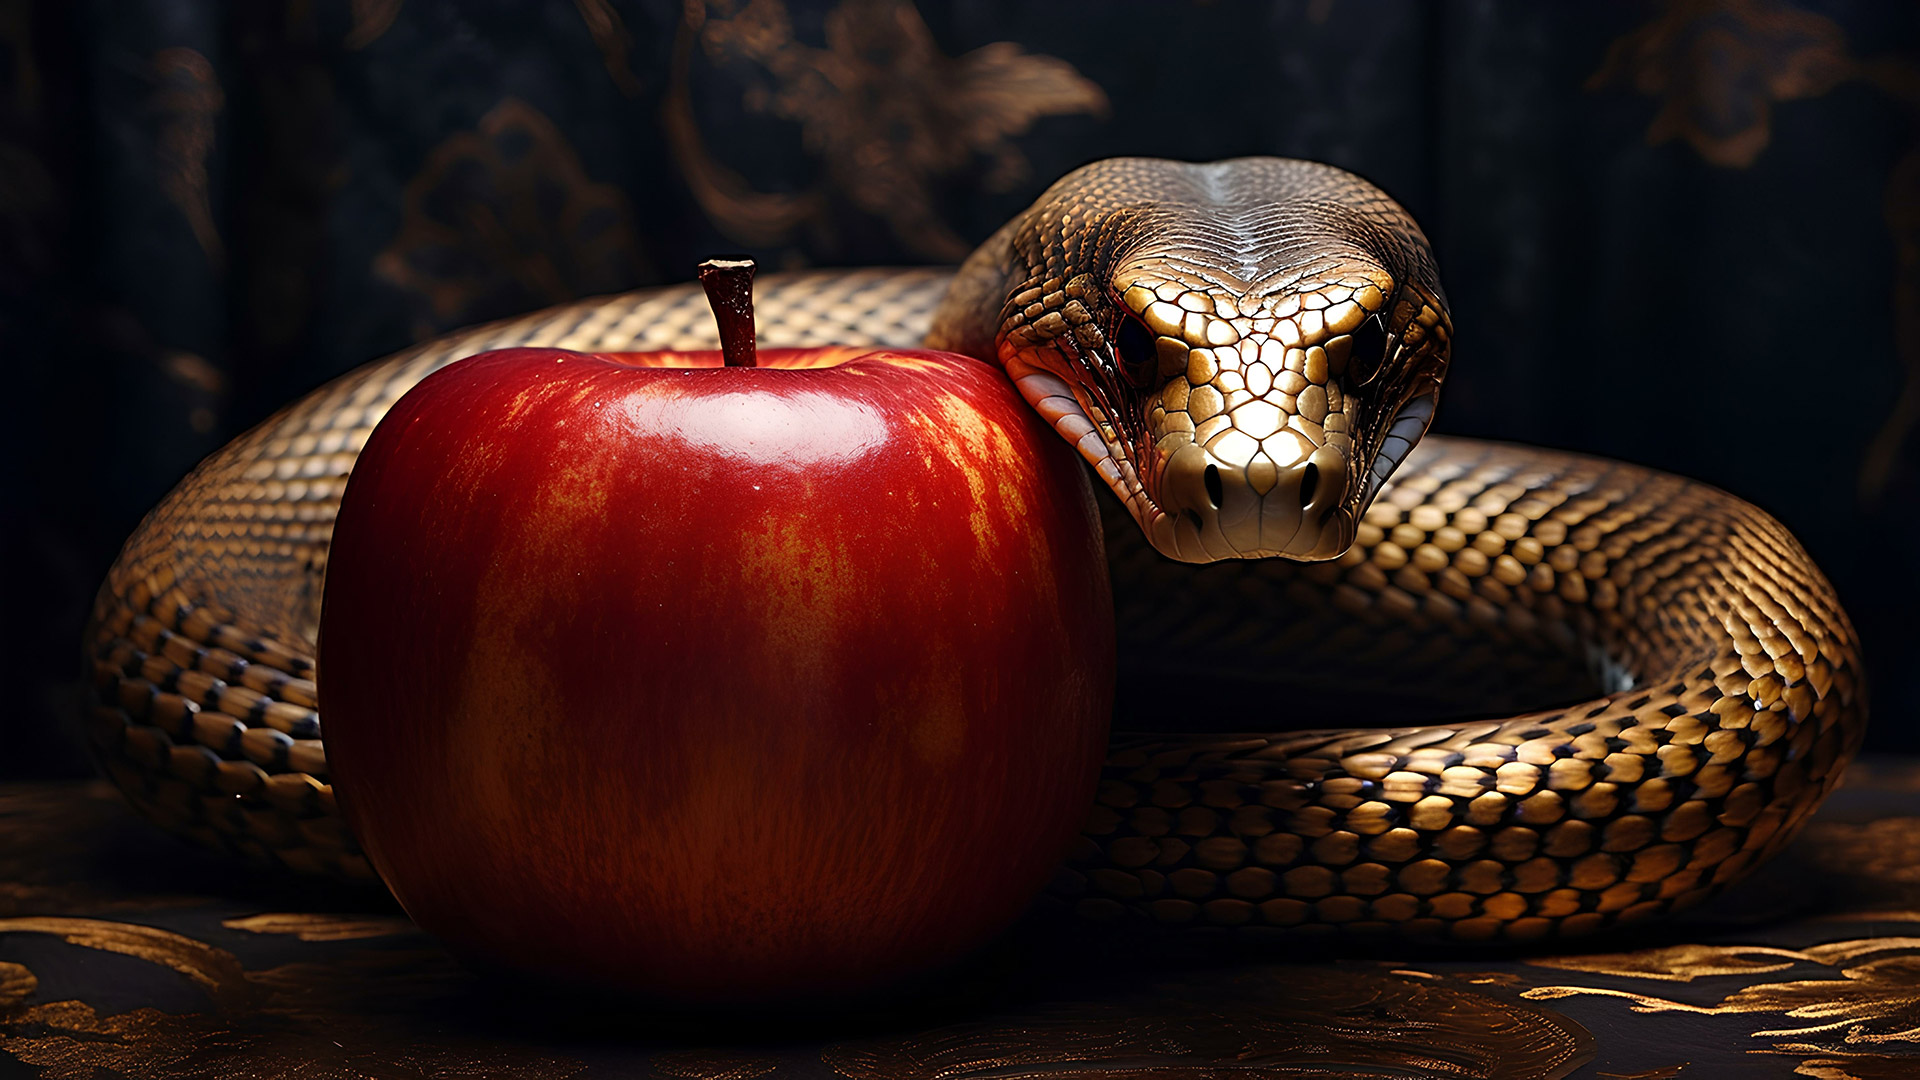 Snake and the Apple